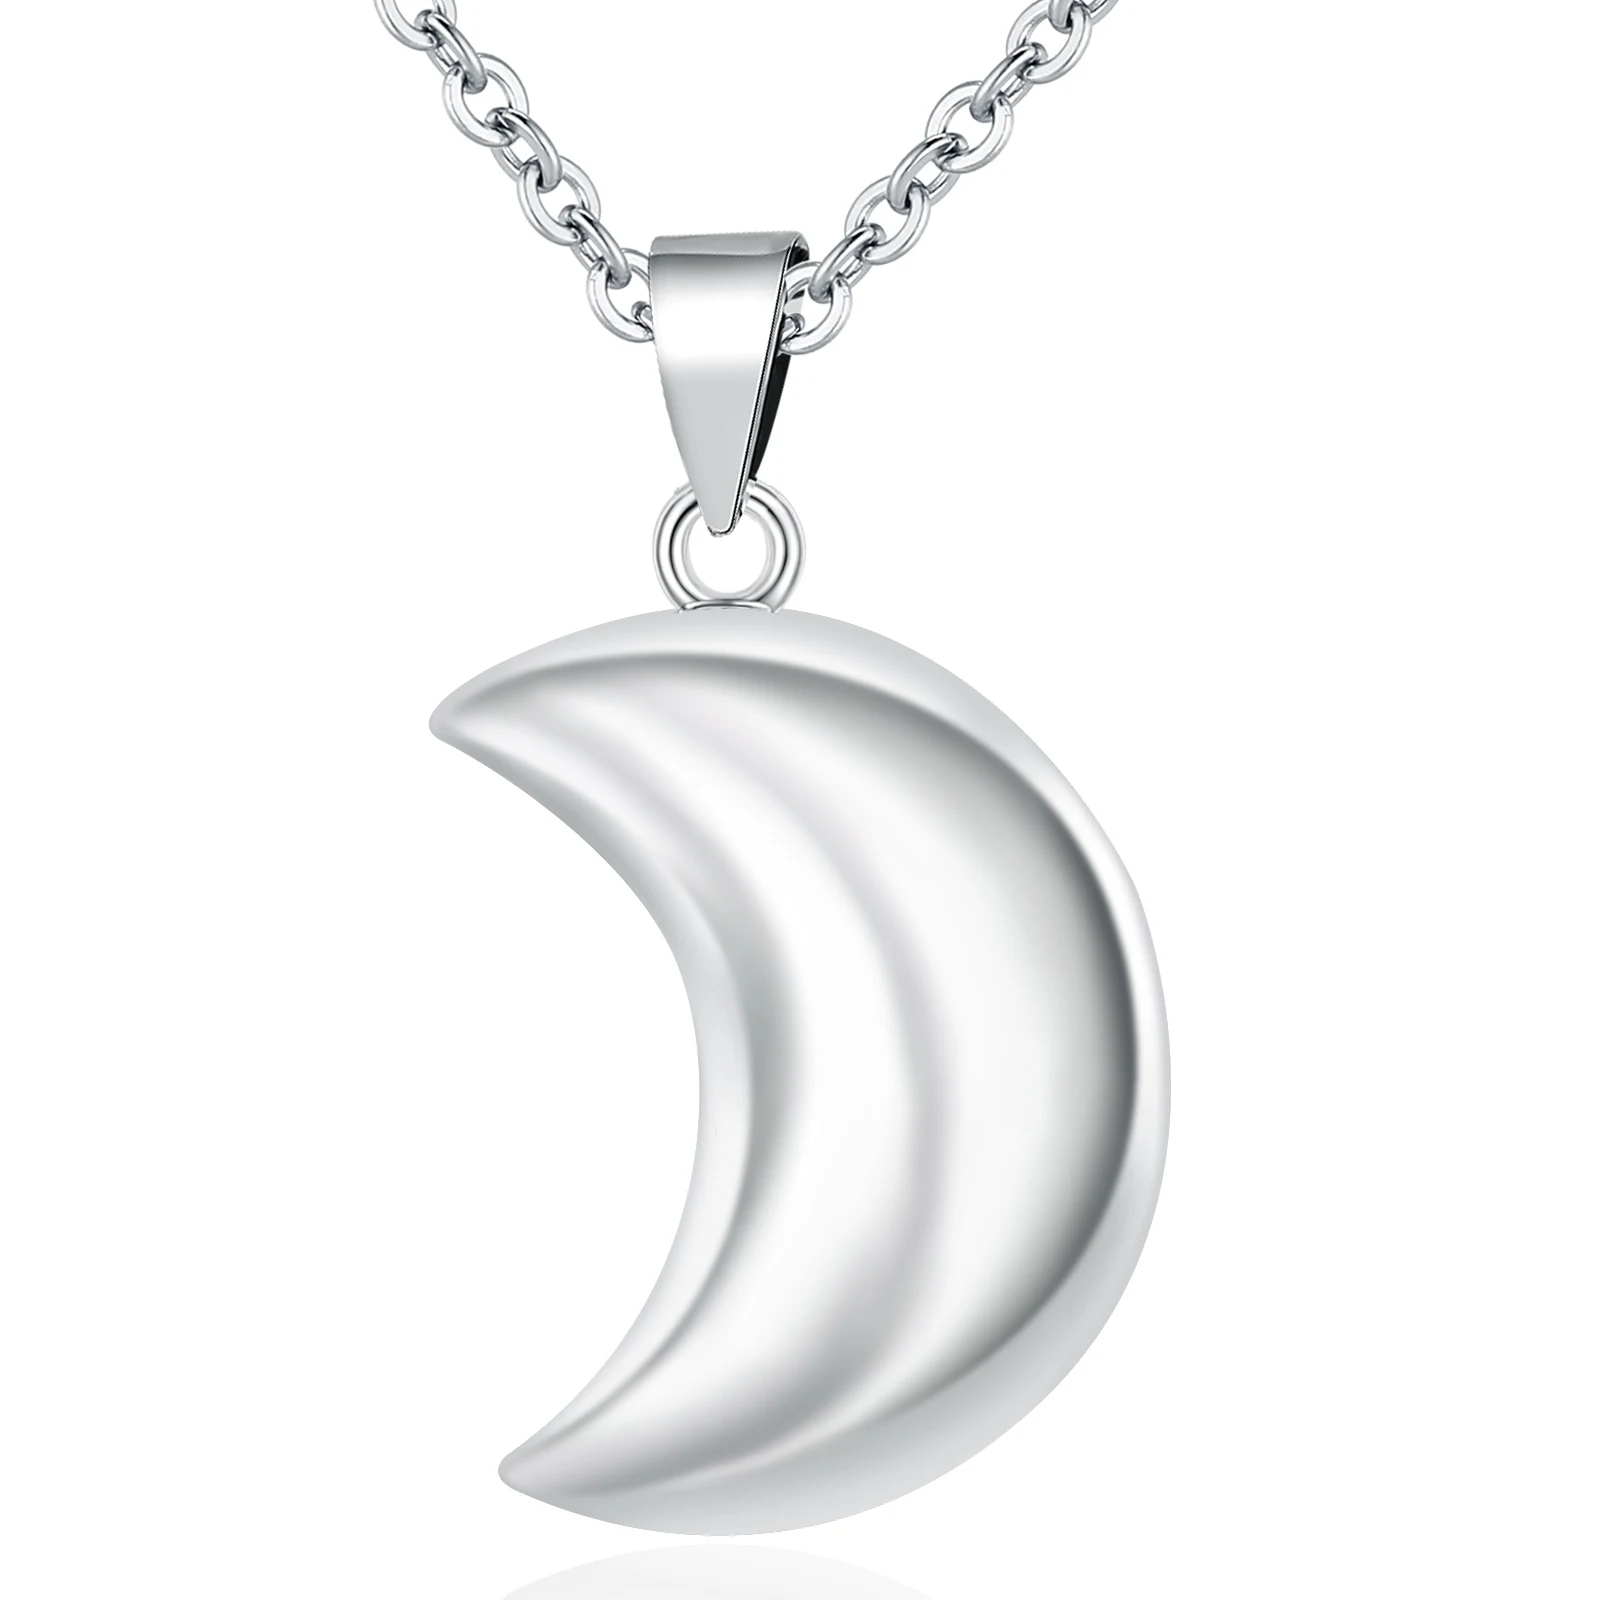 Eudora Pregnancy bola harmony Pendant Moon Smooth Ball Soothing Necklace for pregnant woman pregnancy mother day gift B364